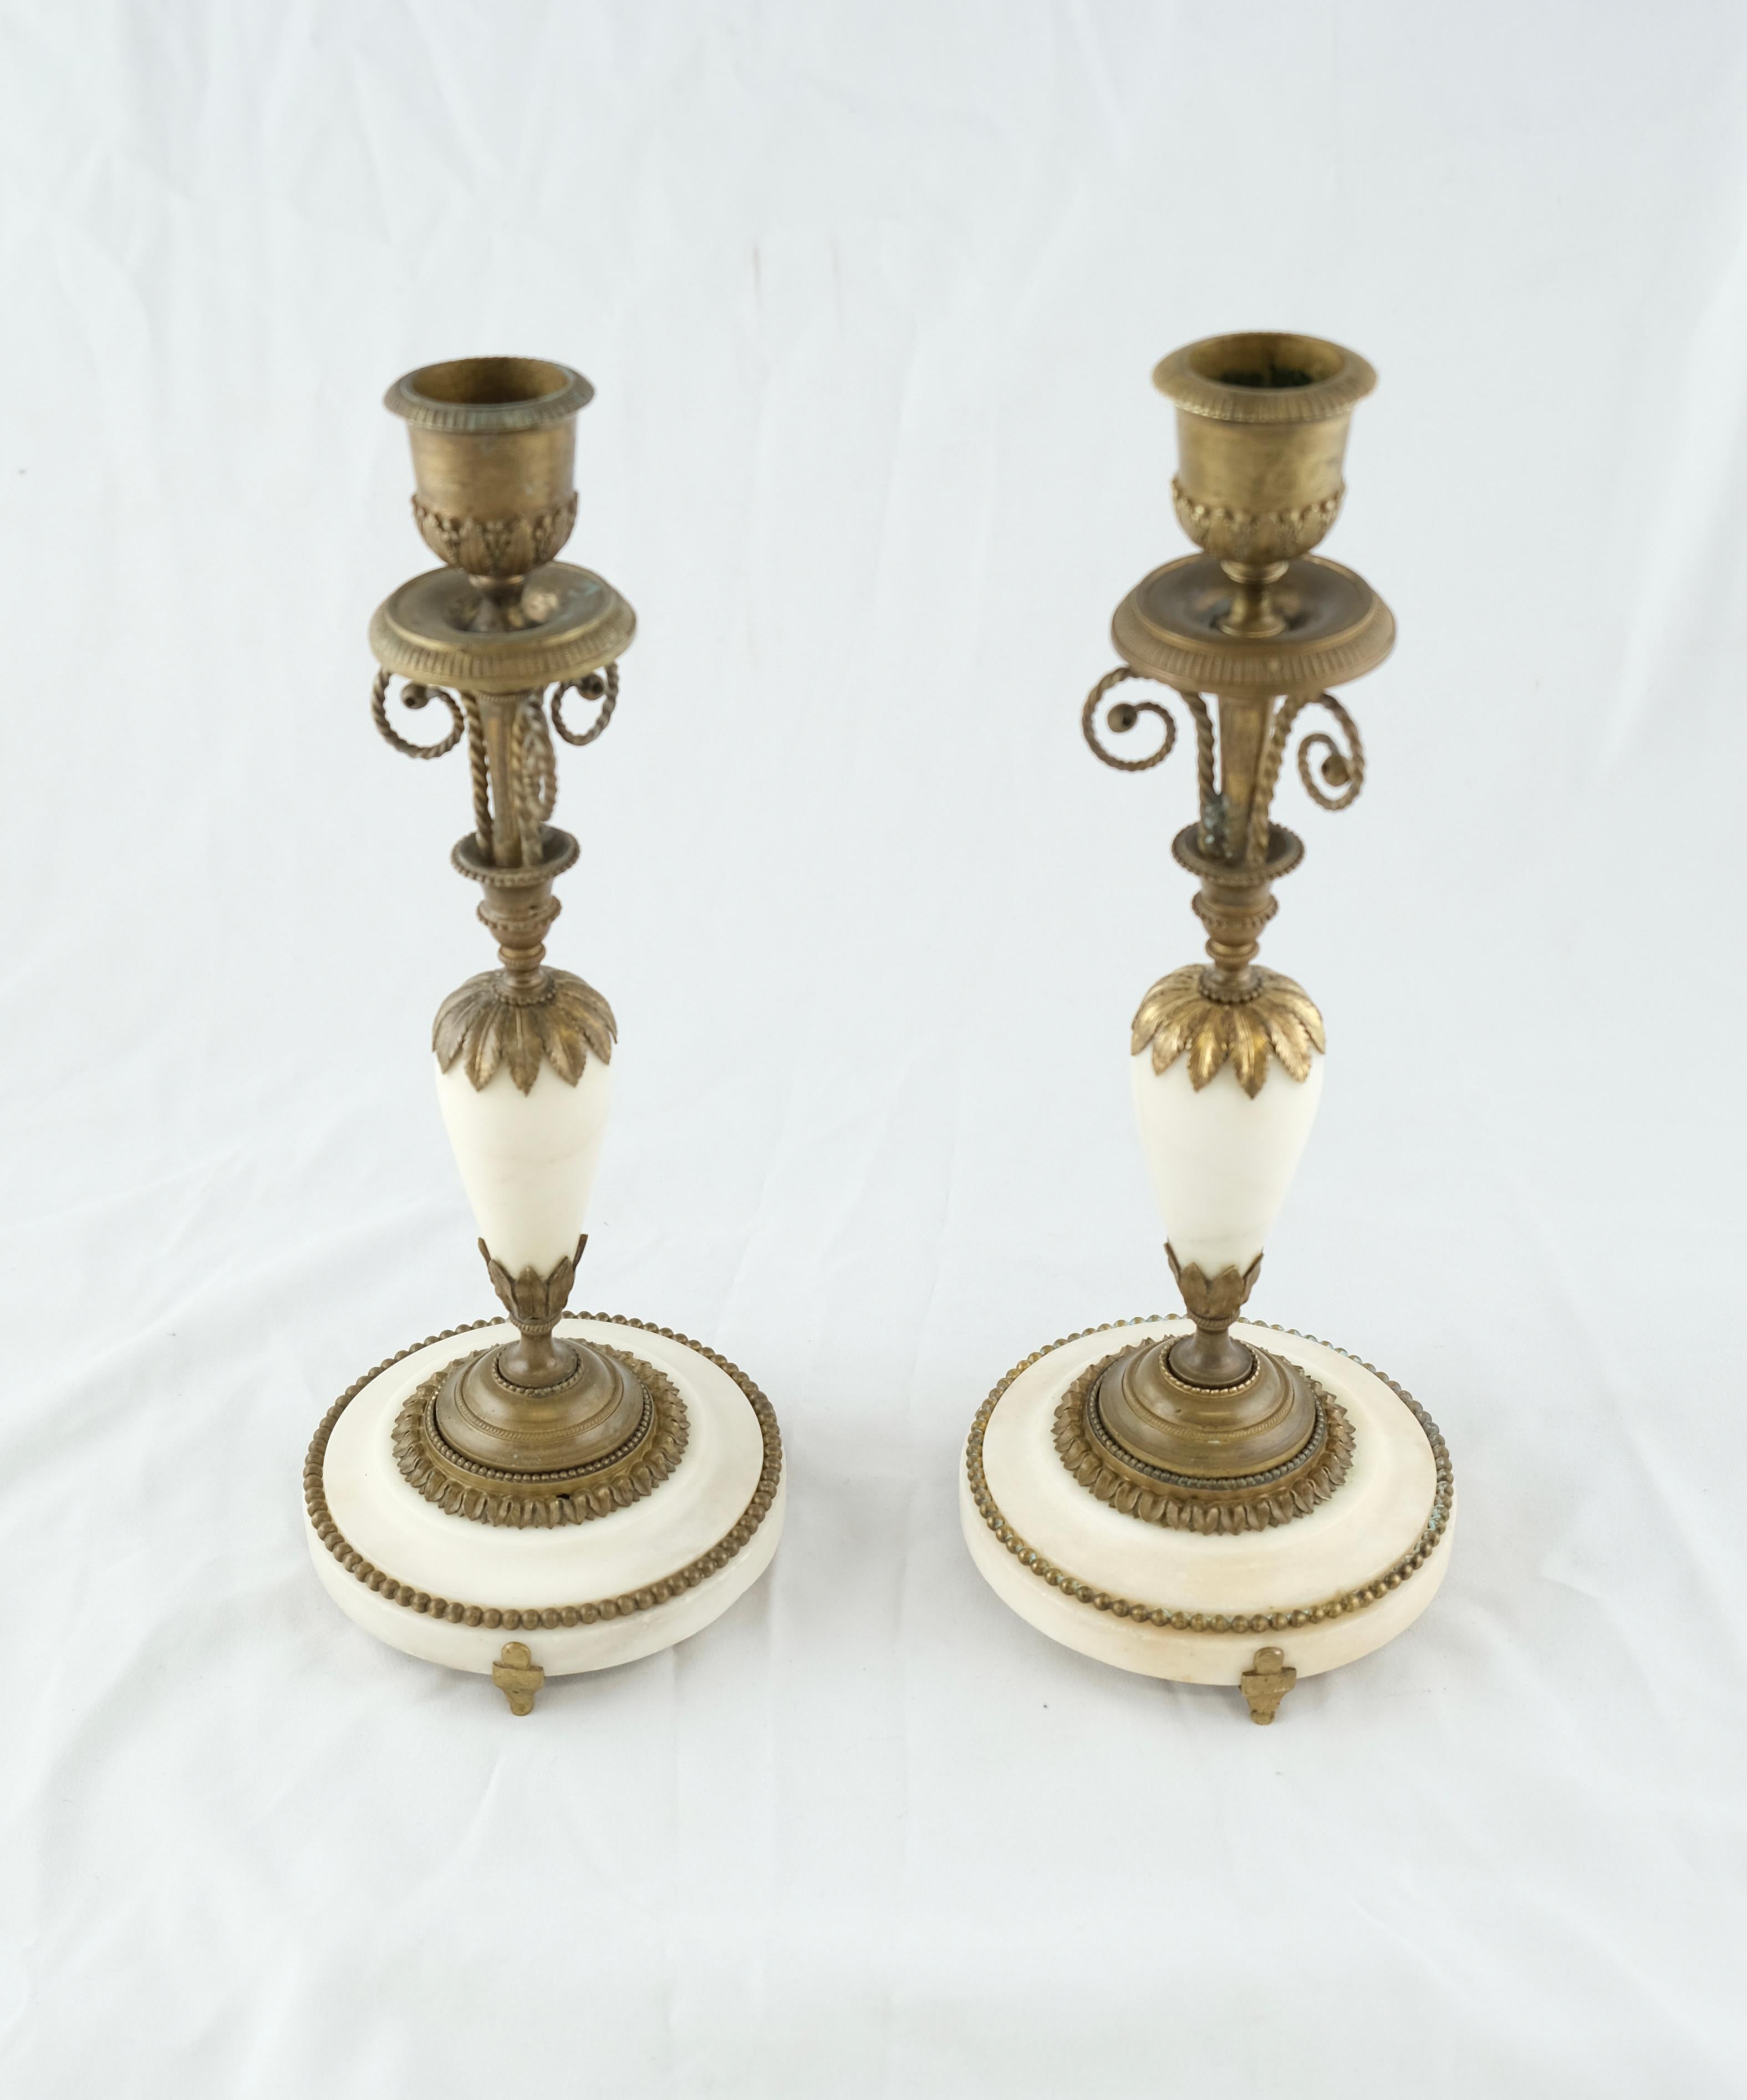 Bronze Pair of French Directoire Candlesticks Made in the 1790s For Sale